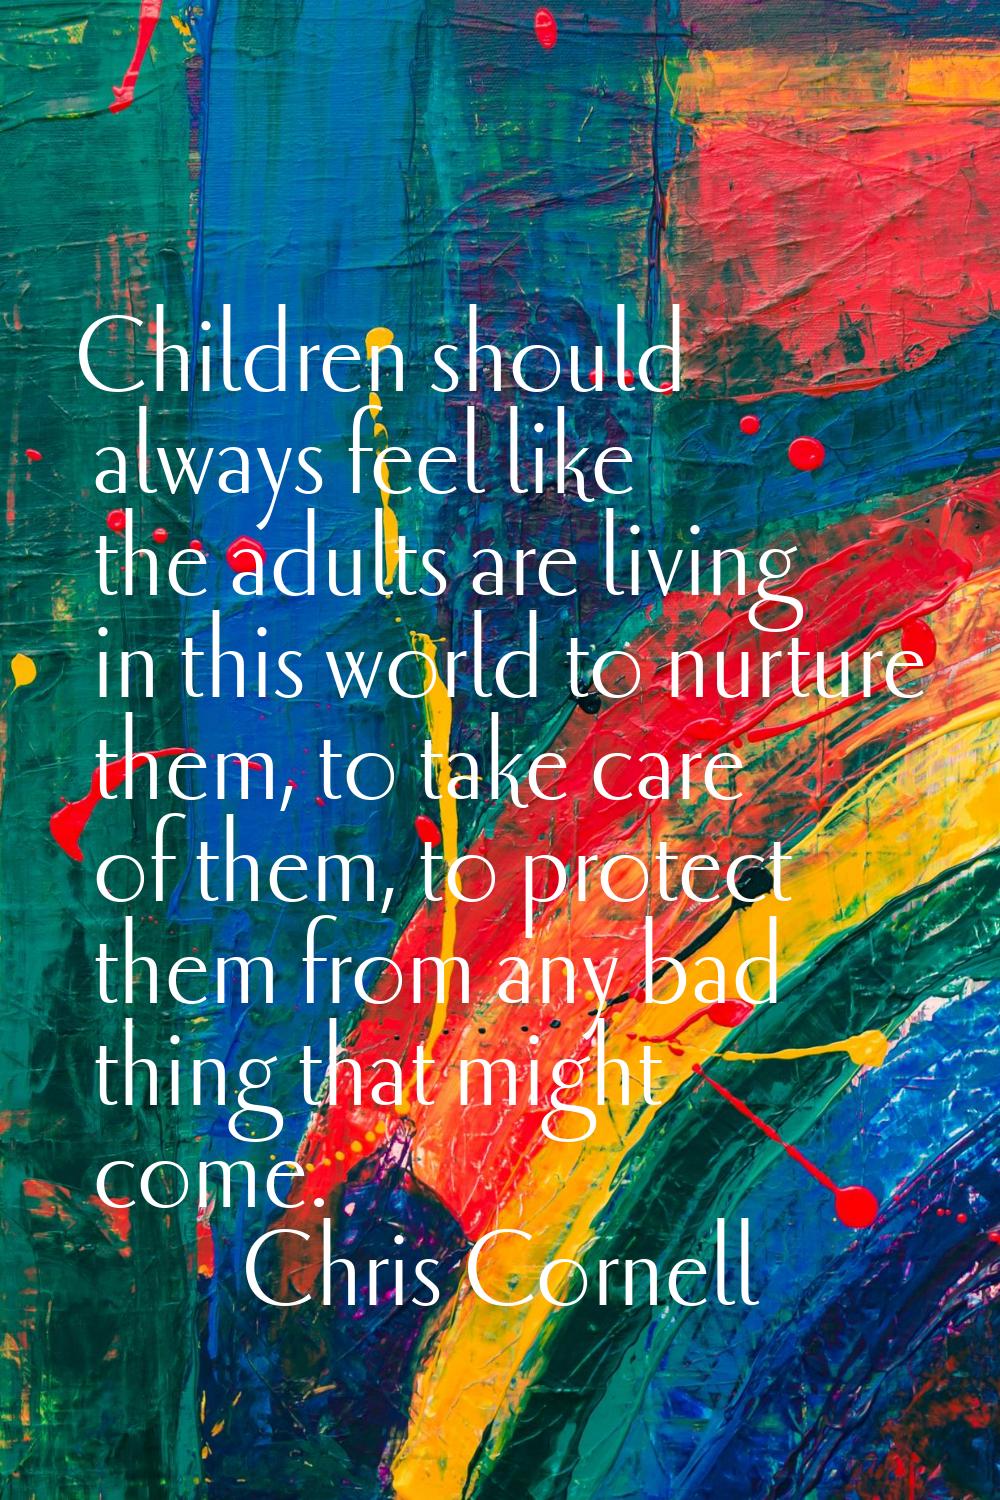 Children should always feel like the adults are living in this world to nurture them, to take care 